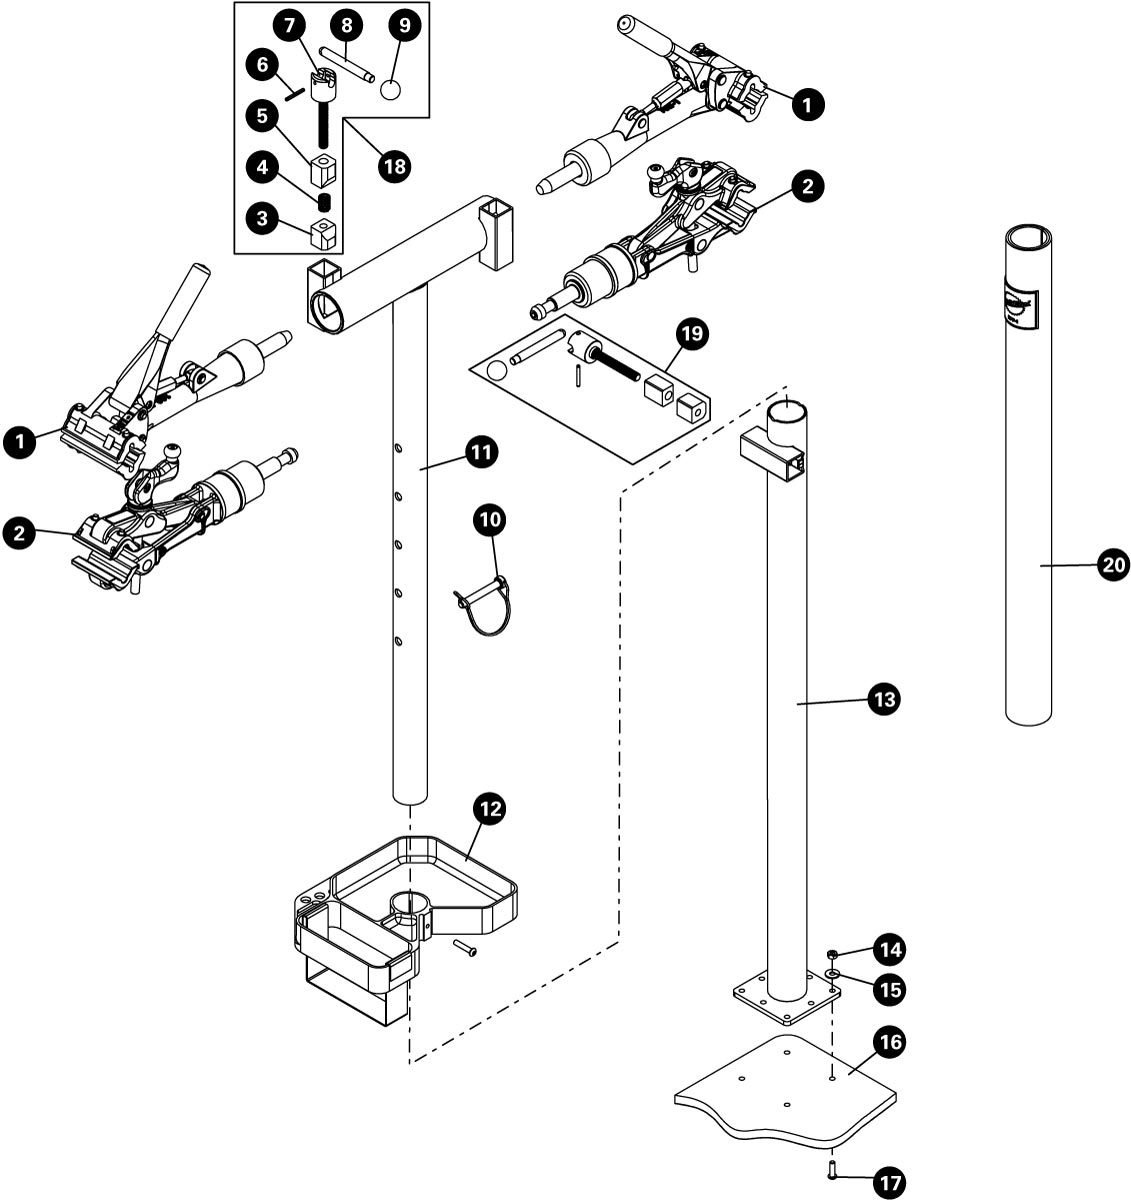 Parts diagram for PRS-2.3-2 Deluxe Double Arm Repair Stand, enlarged